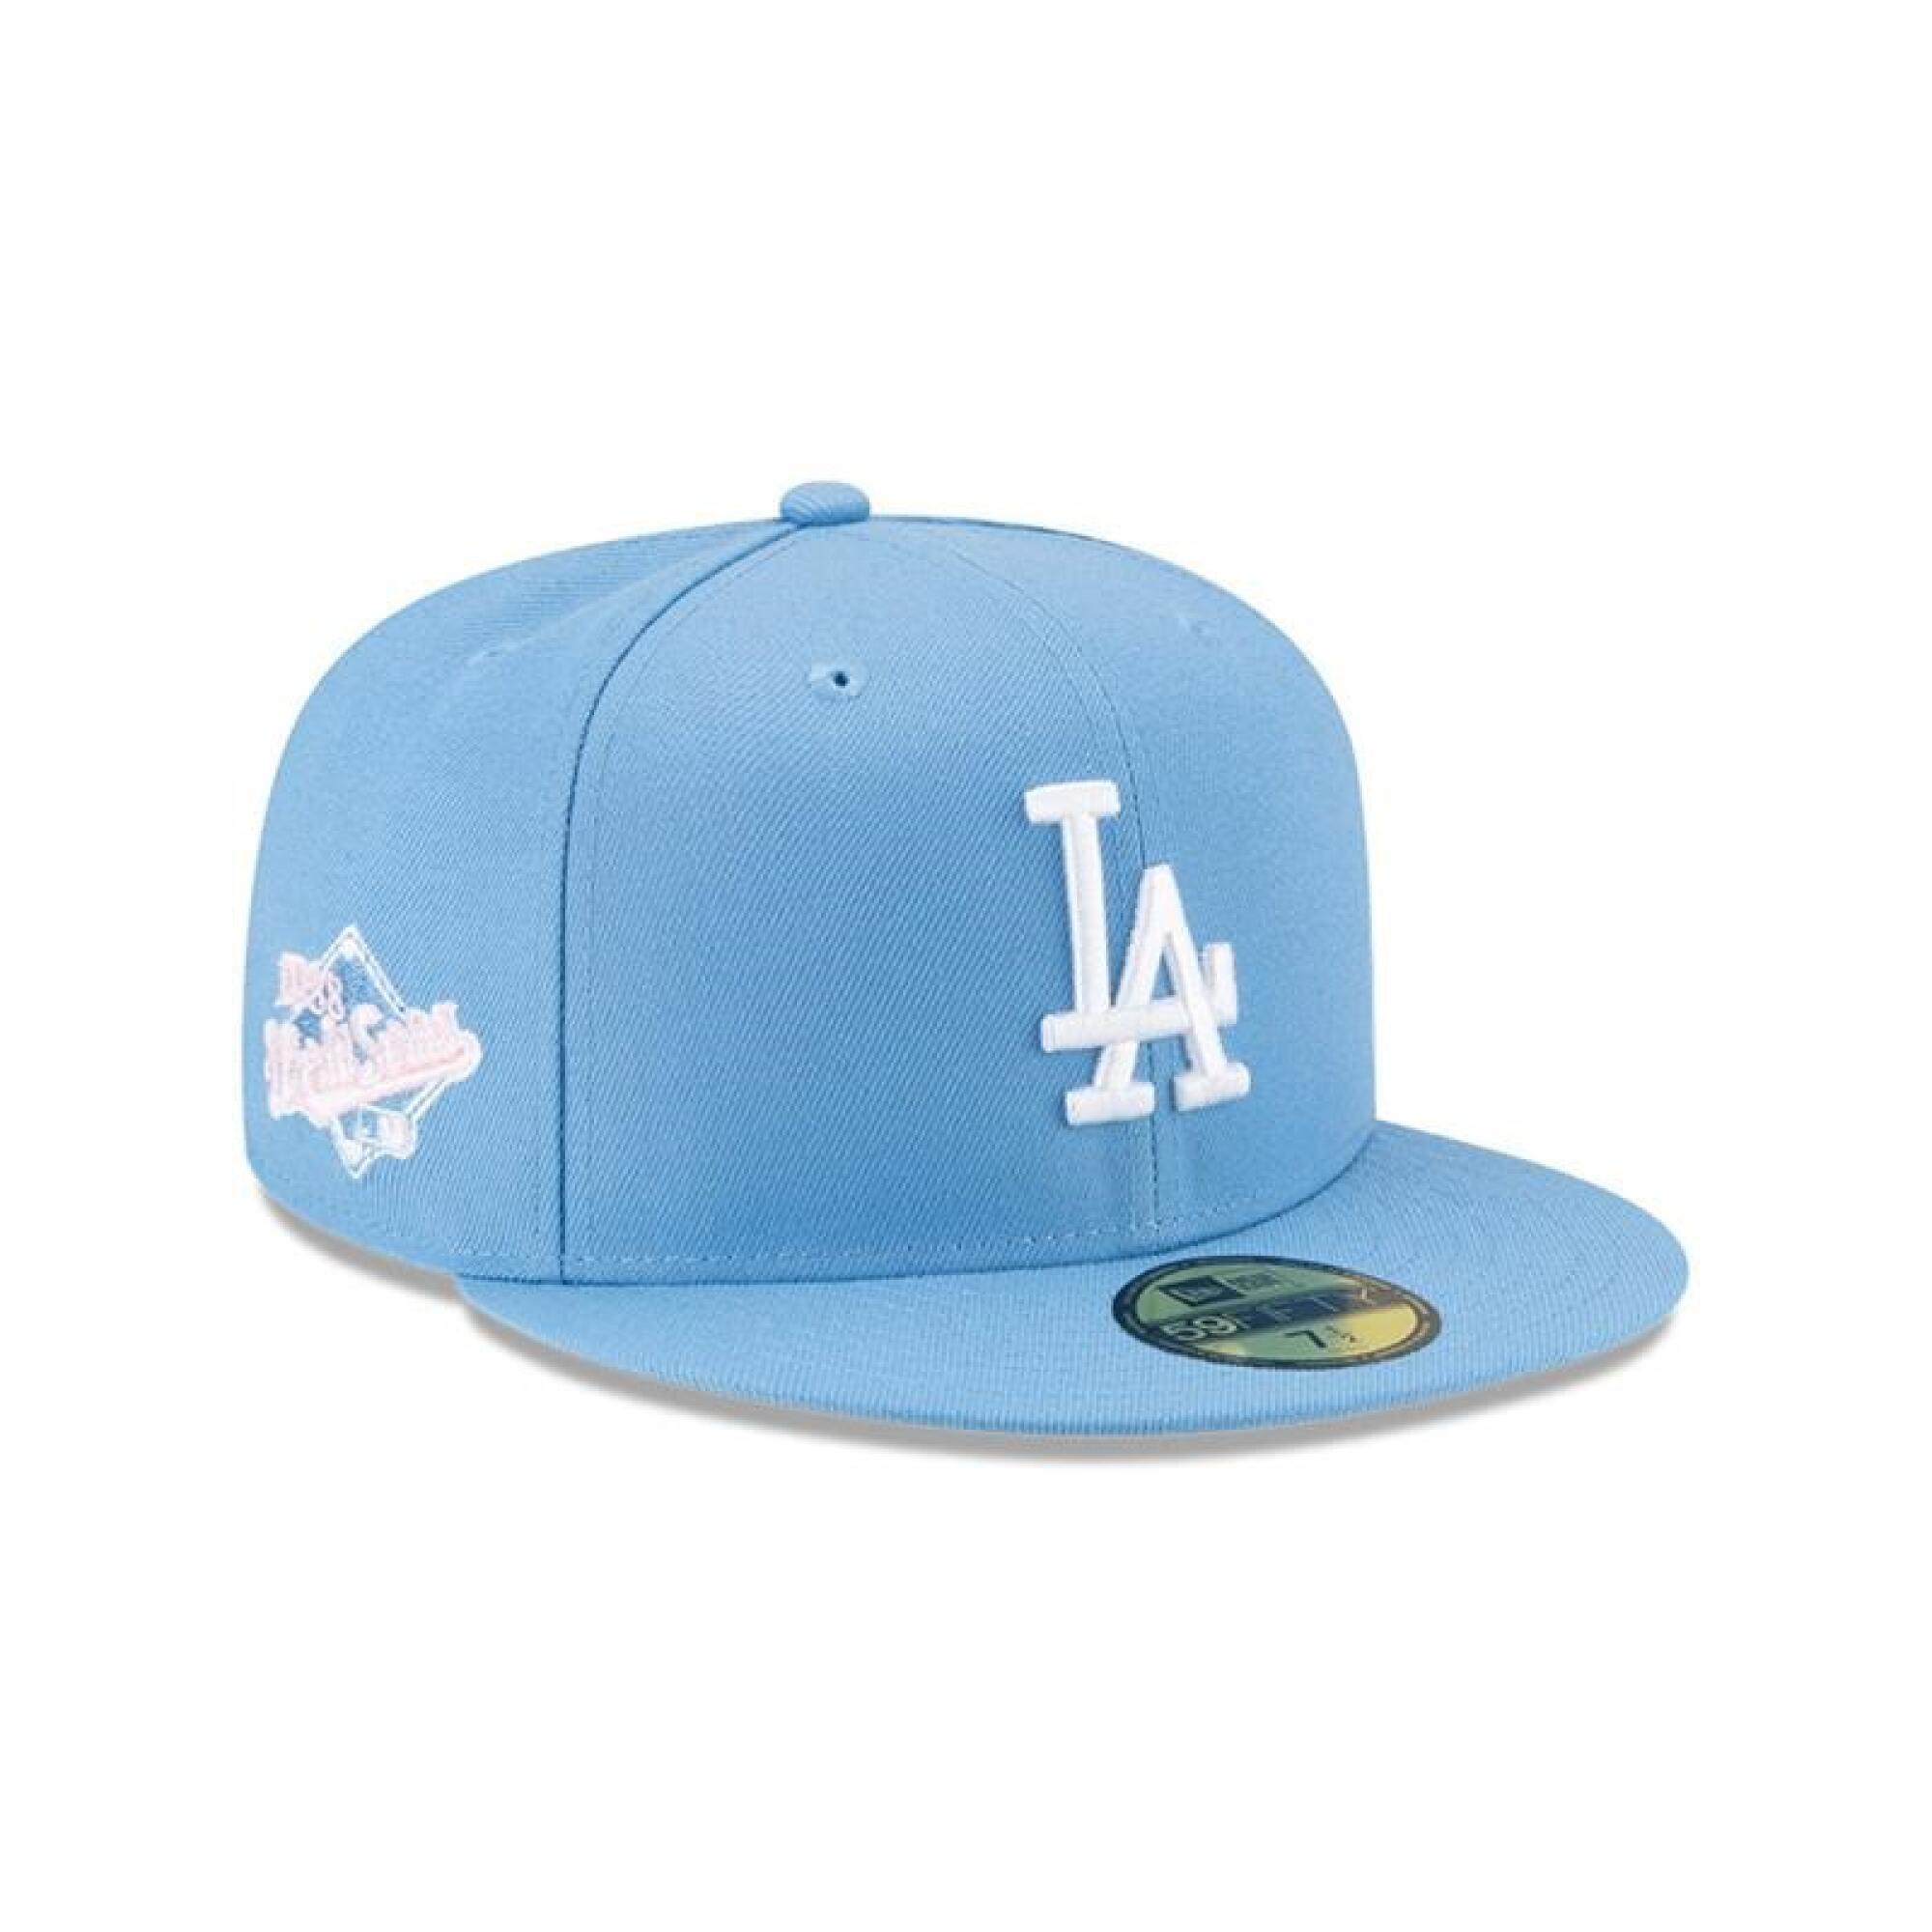 Dodgers will wear these caps and jerseys for MLB special event days in 2017  - True Blue LA